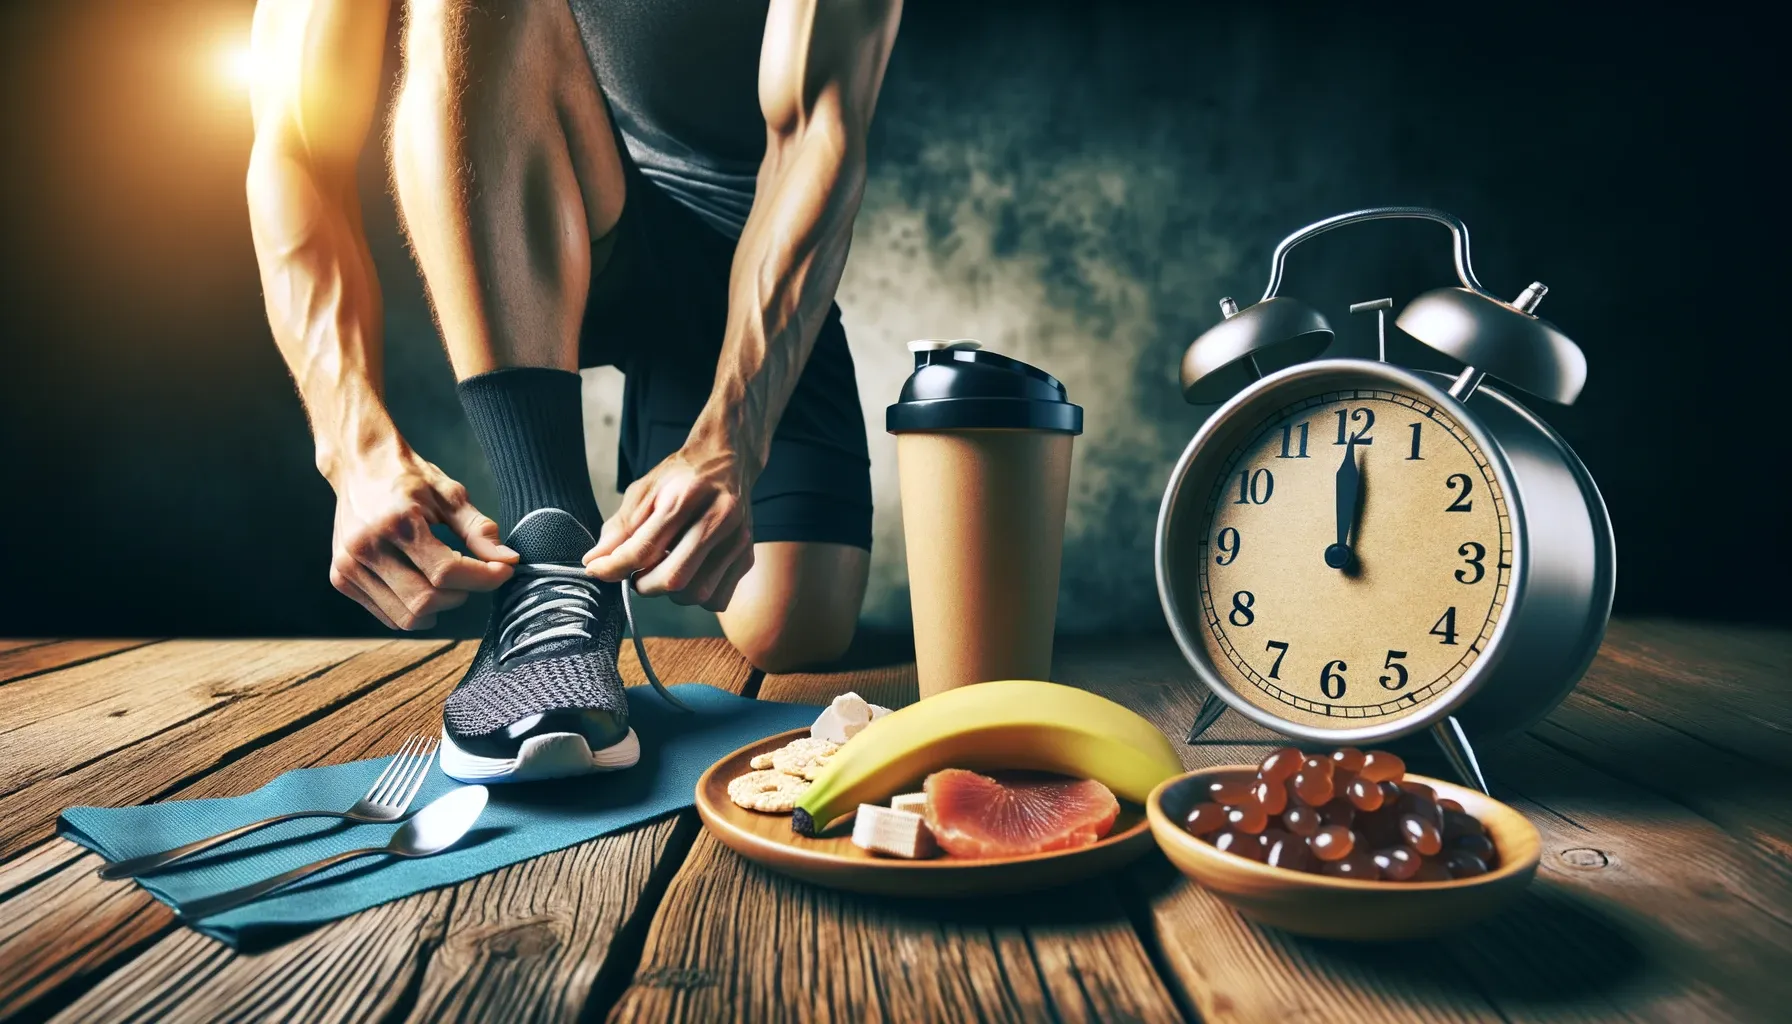 Athlete preparing for competition with a plate of carbohydrate and protein-rich foods beside them and a countdown clock in the background.